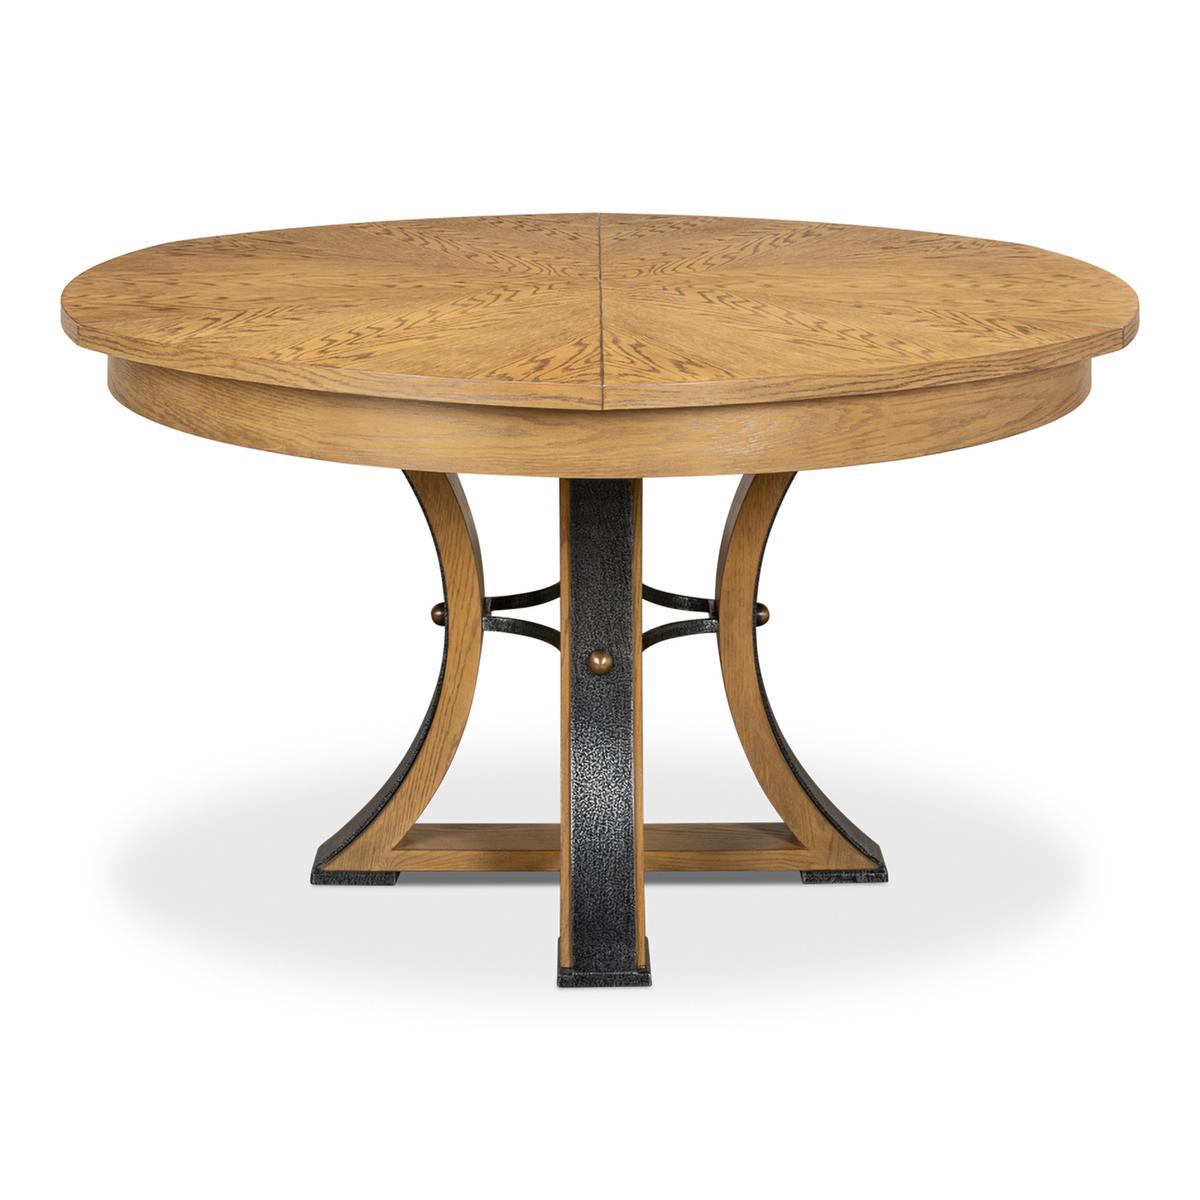 A modern industrial style round extending dining room table. Wire brushed oak top in our Heather grey finish with gunmetal iron accents to the simple geometric form base. The table opens and extends to 70